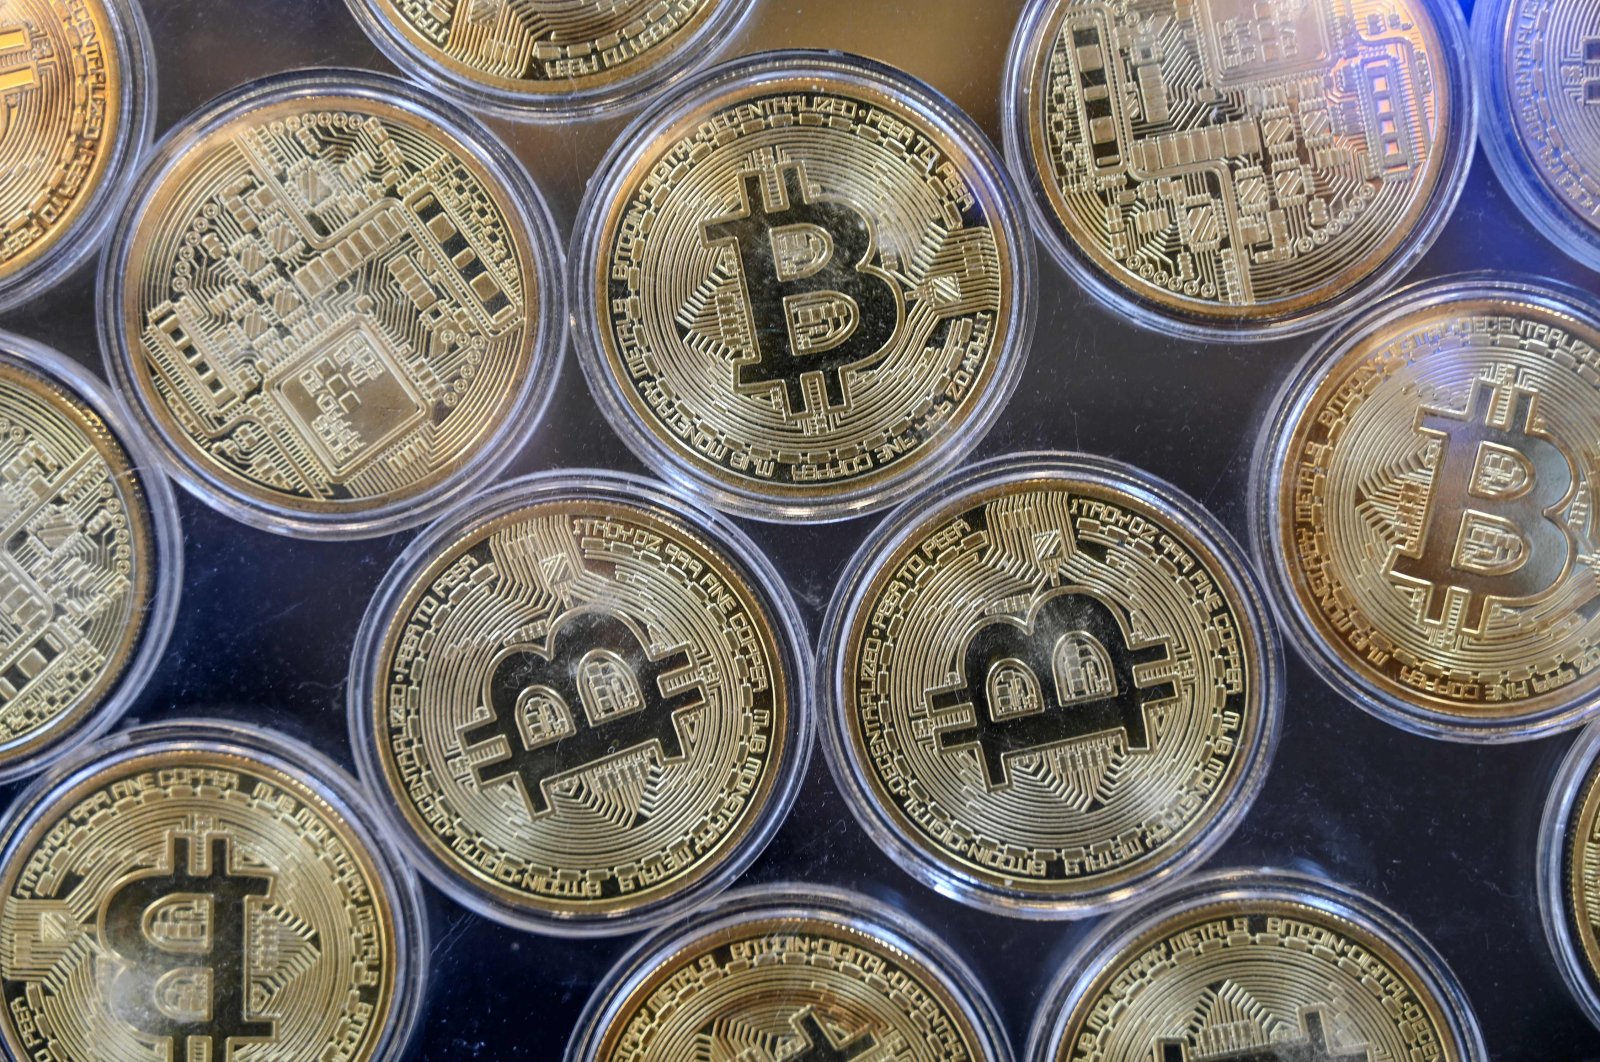 Physical imitations of bitcoins are pictured at a cryptocurrency exchange branch near the Grand Bazaar in Istanbul, Turkey, Oct. 20, 2021. (AFP Photo)